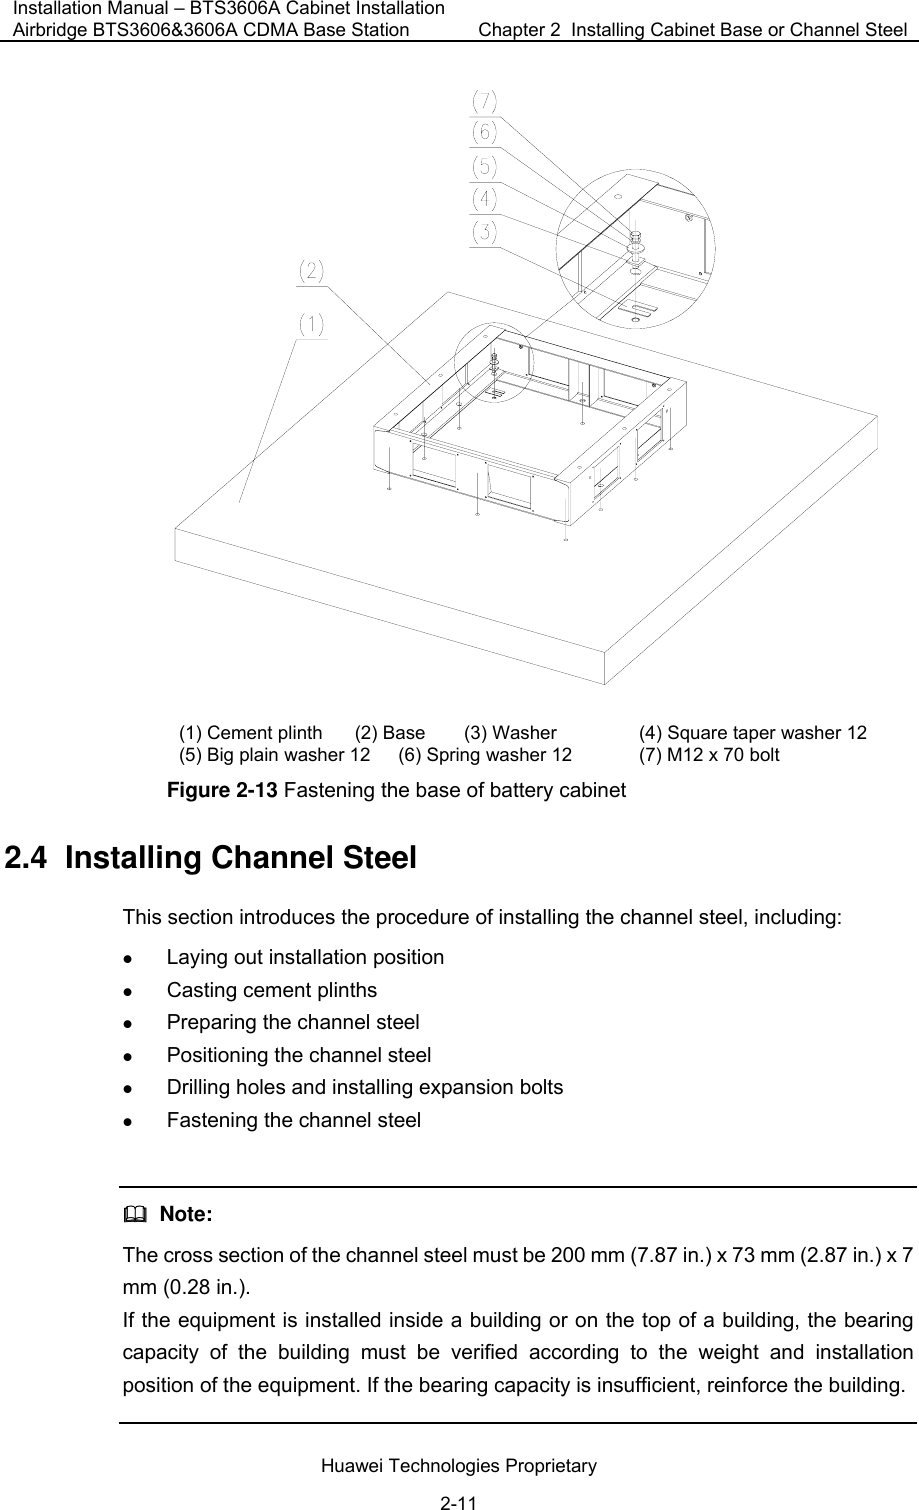 Installation Manual – BTS3606A Cabinet Installation Airbridge BTS3606&amp;3606A CDMA Base Station  Chapter 2  Installing Cabinet Base or Channel Steel  Huawei Technologies Proprietary 2-11  (1) Cement plinth  (2) Base  (3) Washer  (4) Square taper washer 12 (5) Big plain washer 12  (6) Spring washer 12  (7) M12 x 70 bolt Figure 2-13 Fastening the base of battery cabinet 2.4  Installing Channel Steel This section introduces the procedure of installing the channel steel, including: z Laying out installation position z Casting cement plinths z Preparing the channel steel z Positioning the channel steel z Drilling holes and installing expansion bolts z Fastening the channel steel    Note: The cross section of the channel steel must be 200 mm (7.87 in.) x 73 mm (2.87 in.) x 7 mm (0.28 in.). If the equipment is installed inside a building or on the top of a building, the bearing capacity of the building must be verified according to the weight and installation position of the equipment. If the bearing capacity is insufficient, reinforce the building.  